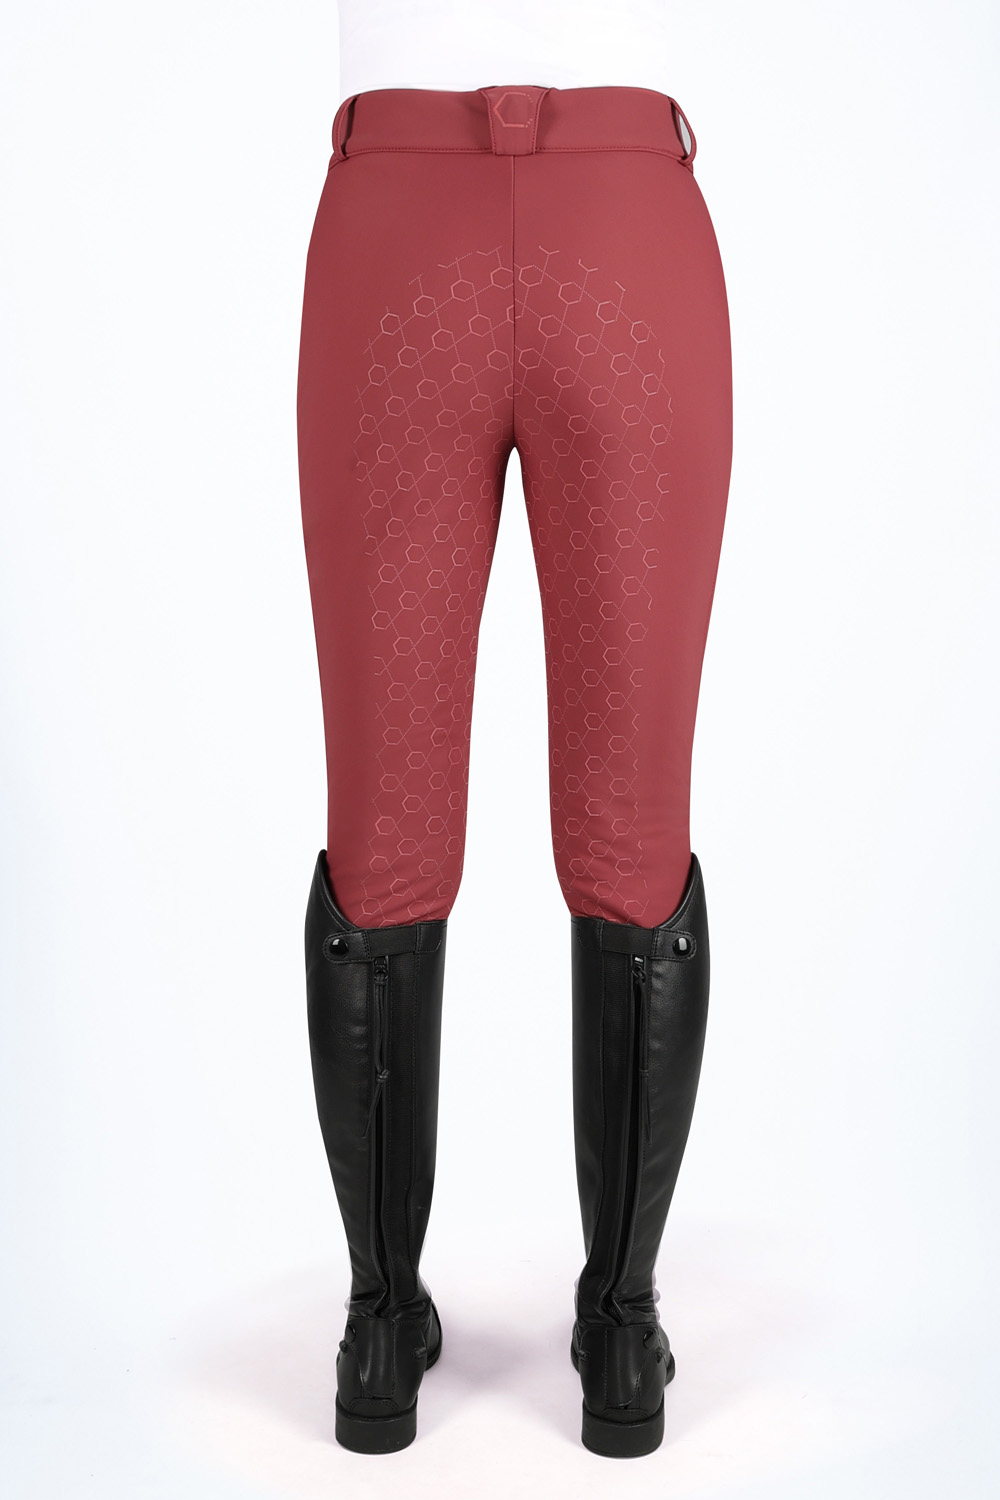 Coldstream Equestrian - Coldstream Balmore Thermal Riding Tights